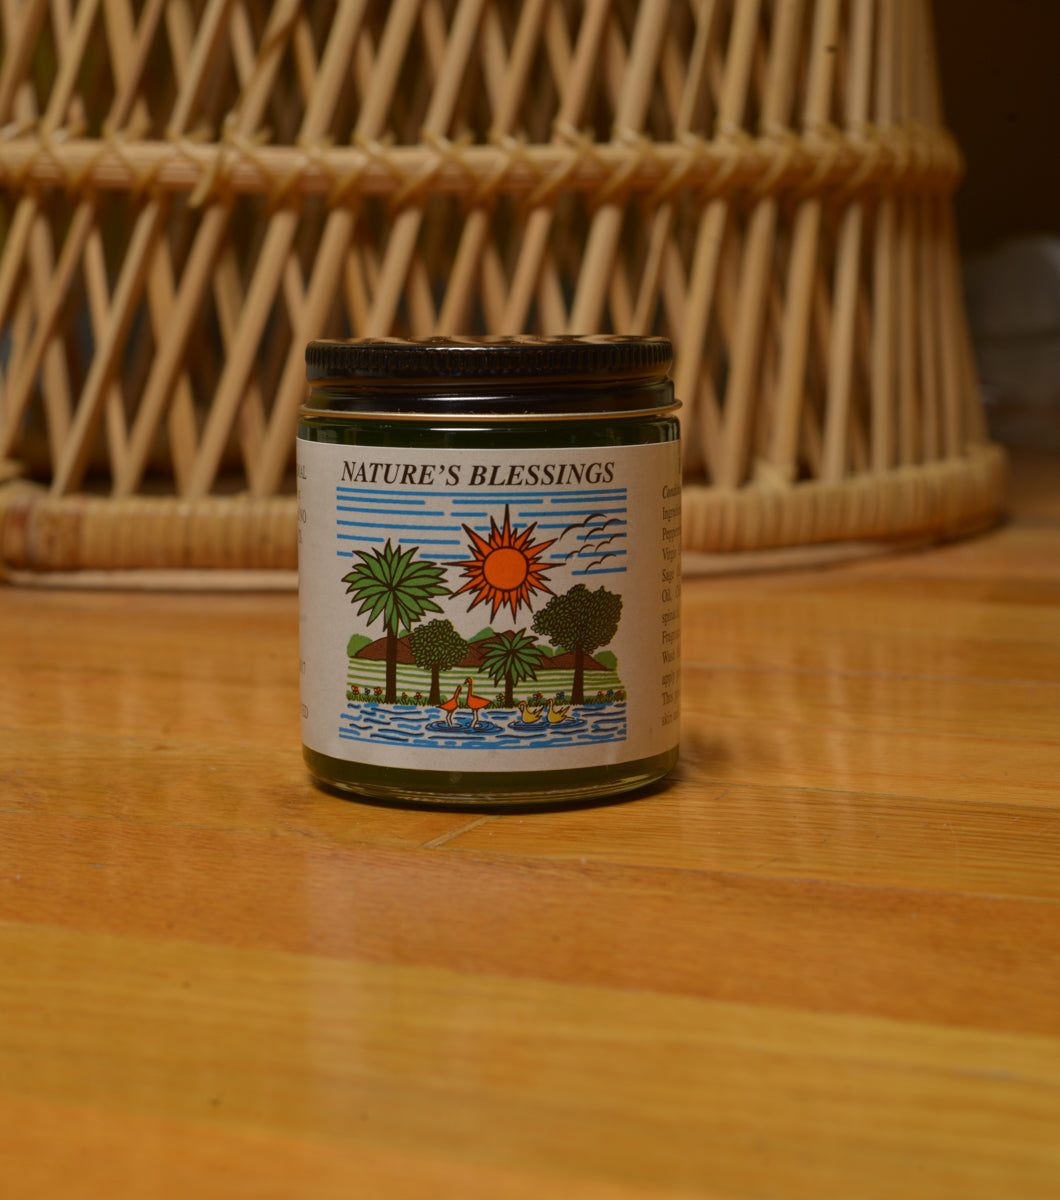 NEW!!! Nature's Blessings Pomade